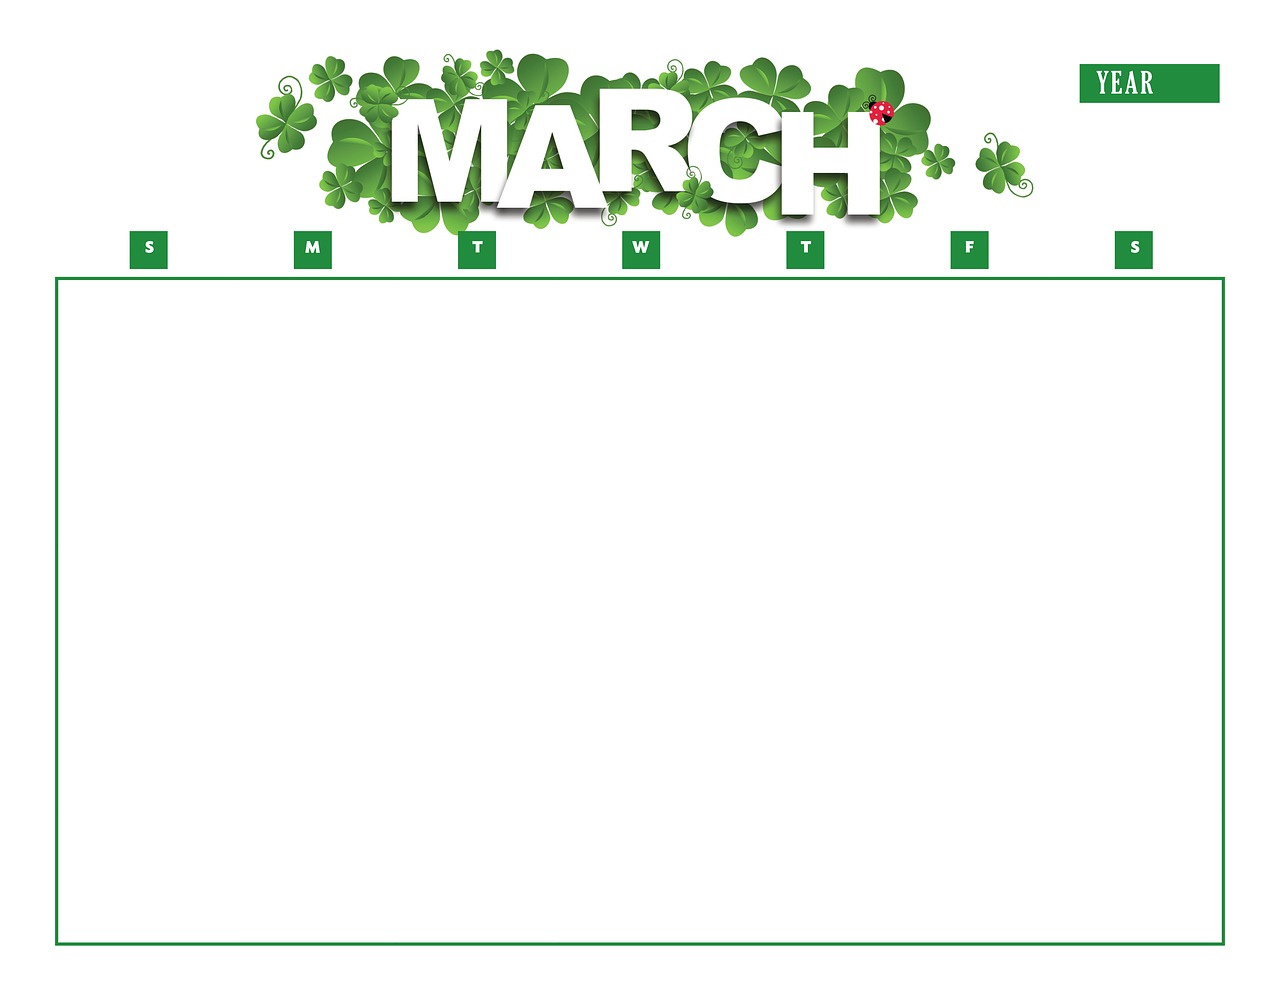 Download Free Photo Of Calendar March Year Month Calendar Template From Needpix Com